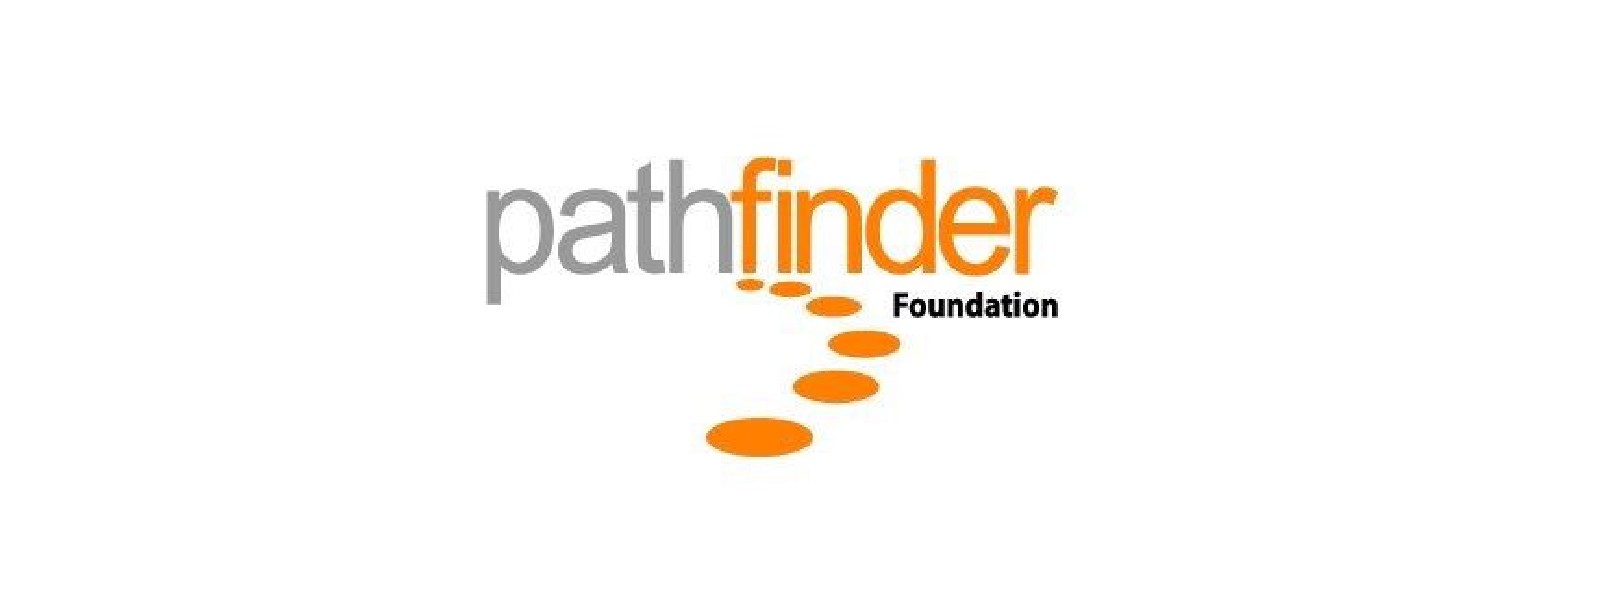 Debt restructuring can save over US $ 3 Bn – Pathfinder Foundation